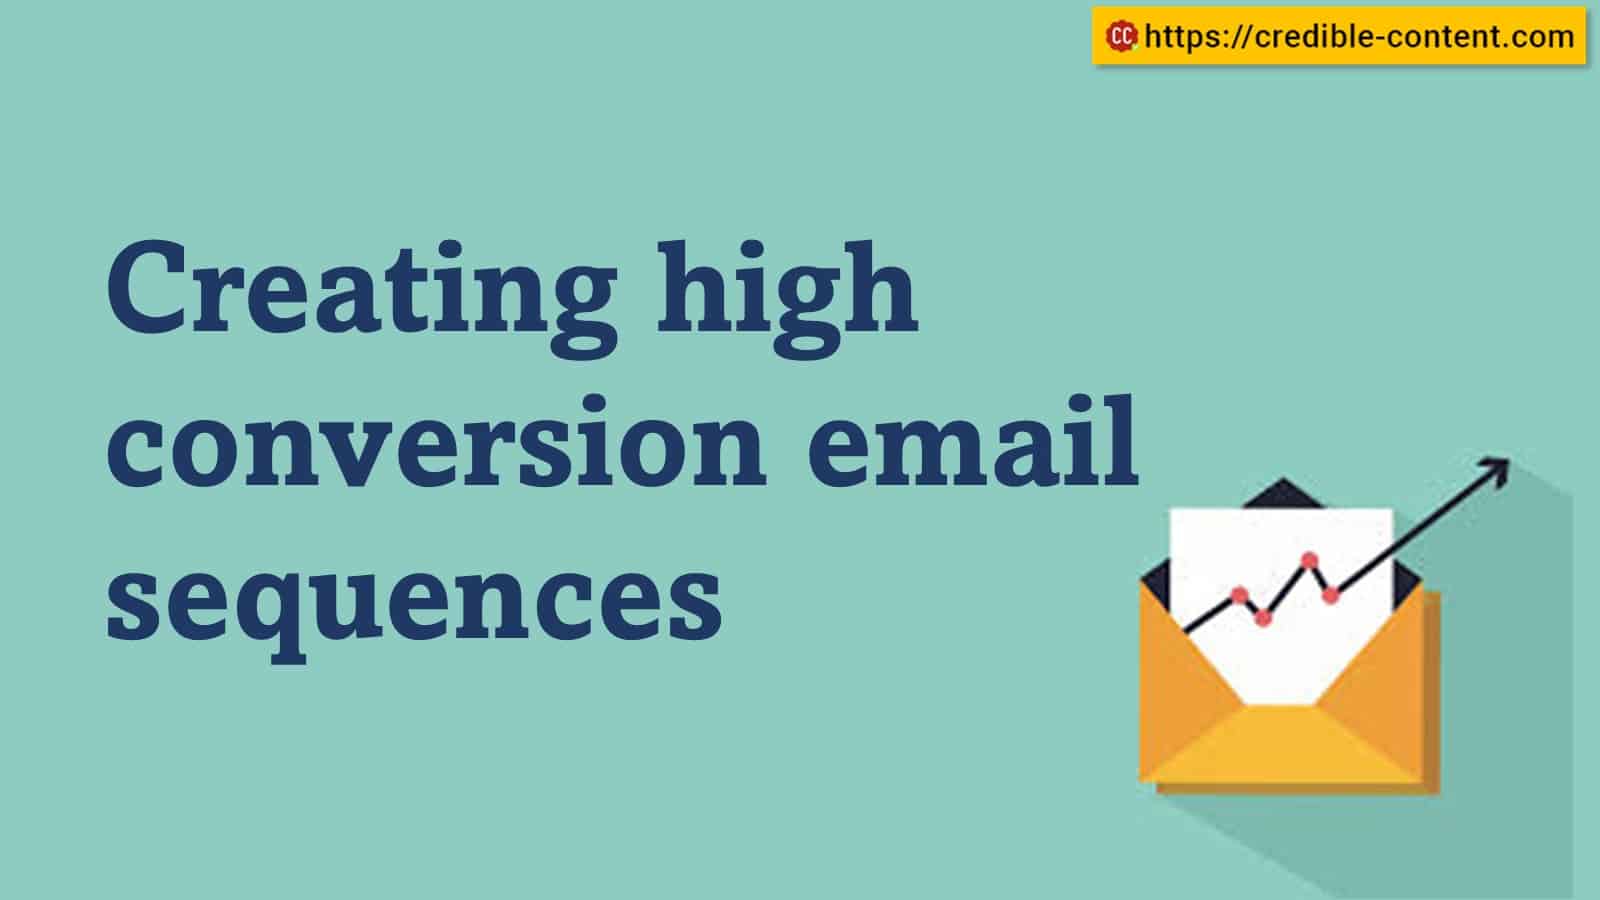 Creating high conversion email sequences